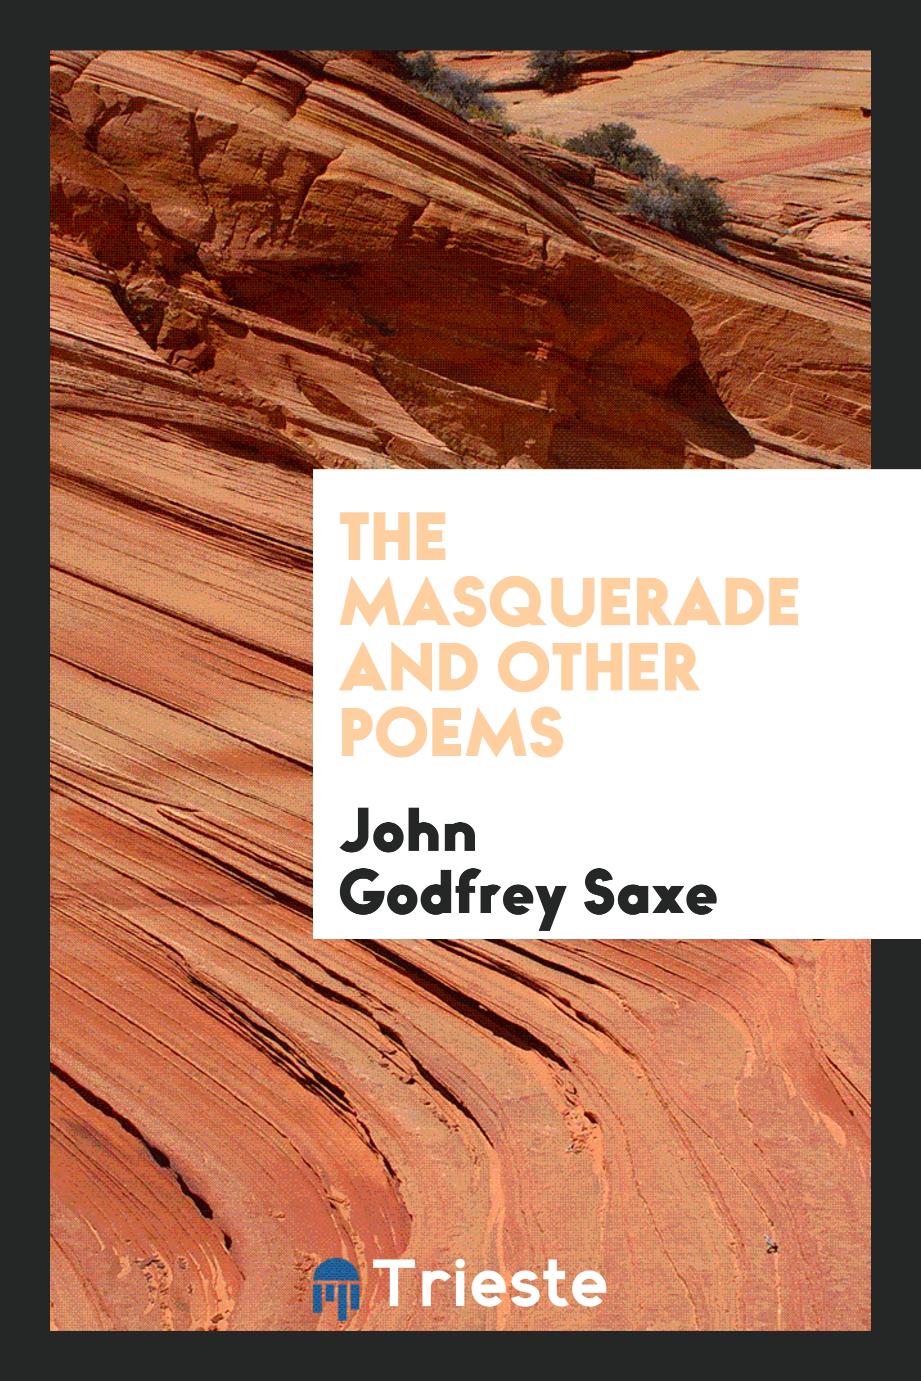 The Masquerade and other poems